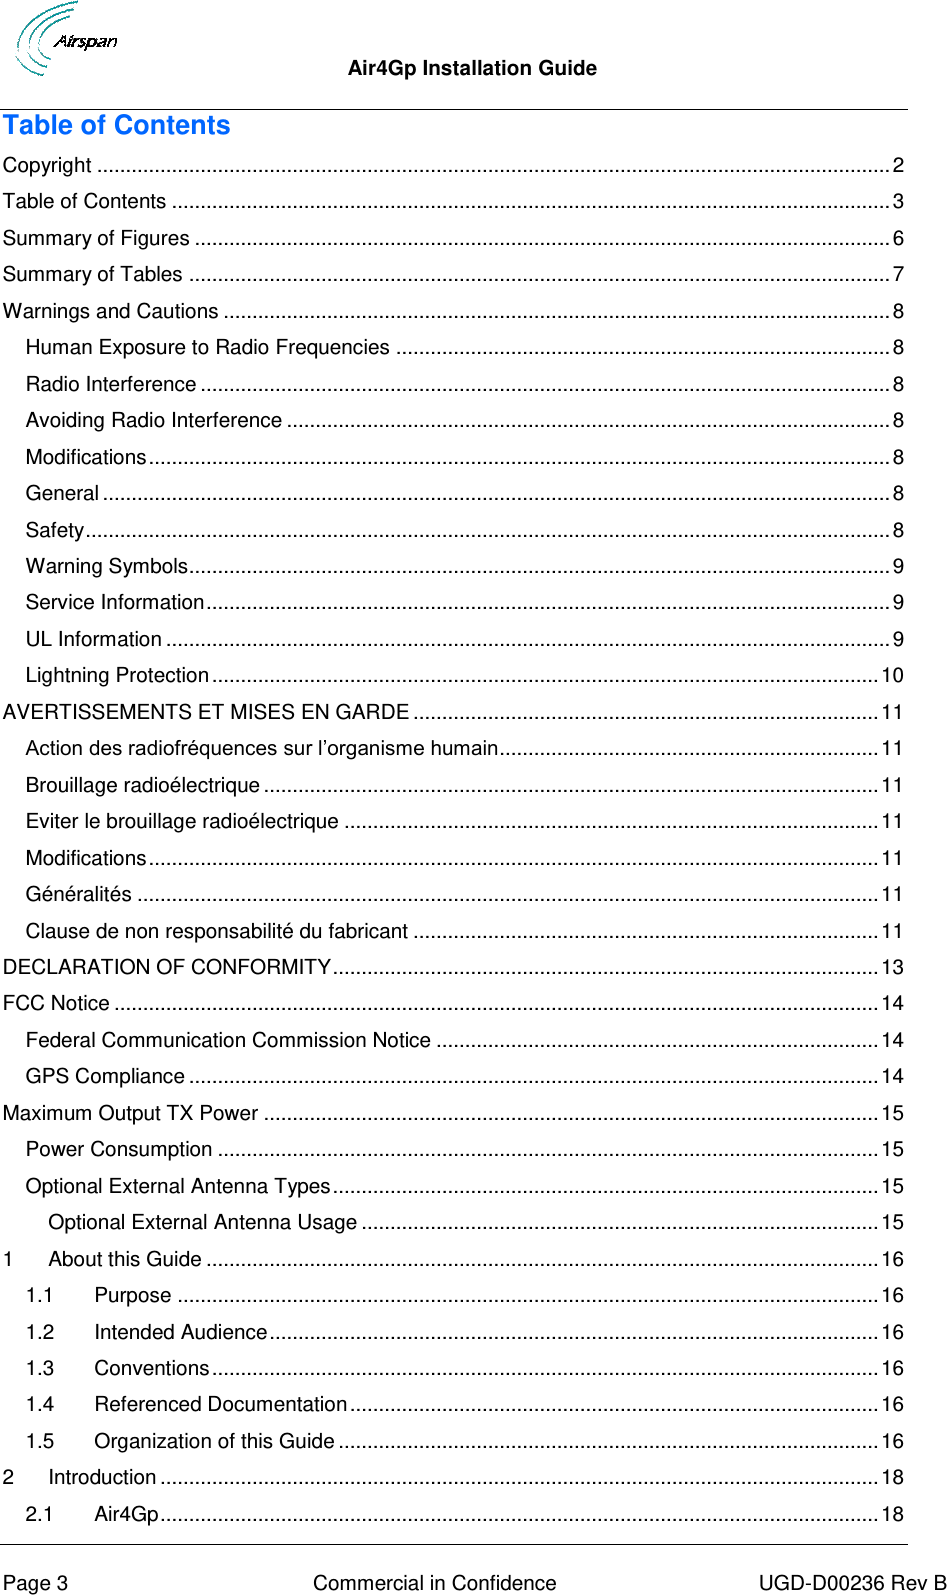  Air4Gp Installation Guide     Page 3  Commercial in Confidence  UGD-D00236 Rev B Table of Contents Copyright .......................................................................................................................................... 2 Table of Contents ............................................................................................................................. 3 Summary of Figures ......................................................................................................................... 6 Summary of Tables .......................................................................................................................... 7 Warnings and Cautions .................................................................................................................... 8 Human Exposure to Radio Frequencies ...................................................................................... 8 Radio Interference ........................................................................................................................ 8 Avoiding Radio Interference ......................................................................................................... 8 Modifications ................................................................................................................................. 8 General ......................................................................................................................................... 8 Safety ............................................................................................................................................ 8 Warning Symbols.......................................................................................................................... 9 Service Information ....................................................................................................................... 9 UL Information .............................................................................................................................. 9 Lightning Protection .................................................................................................................... 10 AVERTISSEMENTS ET MISES EN GARDE ................................................................................. 11 Action des radiofréquences sur l’organisme humain.................................................................. 11 Brouillage radioélectrique ........................................................................................................... 11 Eviter le brouillage radioélectrique ............................................................................................. 11 Modifications ............................................................................................................................... 11 Généralités ................................................................................................................................. 11 Clause de non responsabilité du fabricant ................................................................................. 11 DECLARATION OF CONFORMITY ............................................................................................... 13 FCC Notice ..................................................................................................................................... 14 Federal Communication Commission Notice ............................................................................. 14 GPS Compliance ........................................................................................................................ 14 Maximum Output TX Power ........................................................................................................... 15 Power Consumption ................................................................................................................... 15 Optional External Antenna Types ............................................................................................... 15 Optional External Antenna Usage .......................................................................................... 15 1 About this Guide ..................................................................................................................... 16 1.1 Purpose .......................................................................................................................... 16 1.2 Intended Audience .......................................................................................................... 16 1.3 Conventions .................................................................................................................... 16 1.4 Referenced Documentation ............................................................................................ 16 1.5 Organization of this Guide .............................................................................................. 16 2 Introduction ............................................................................................................................. 18 2.1 Air4Gp ............................................................................................................................. 18 